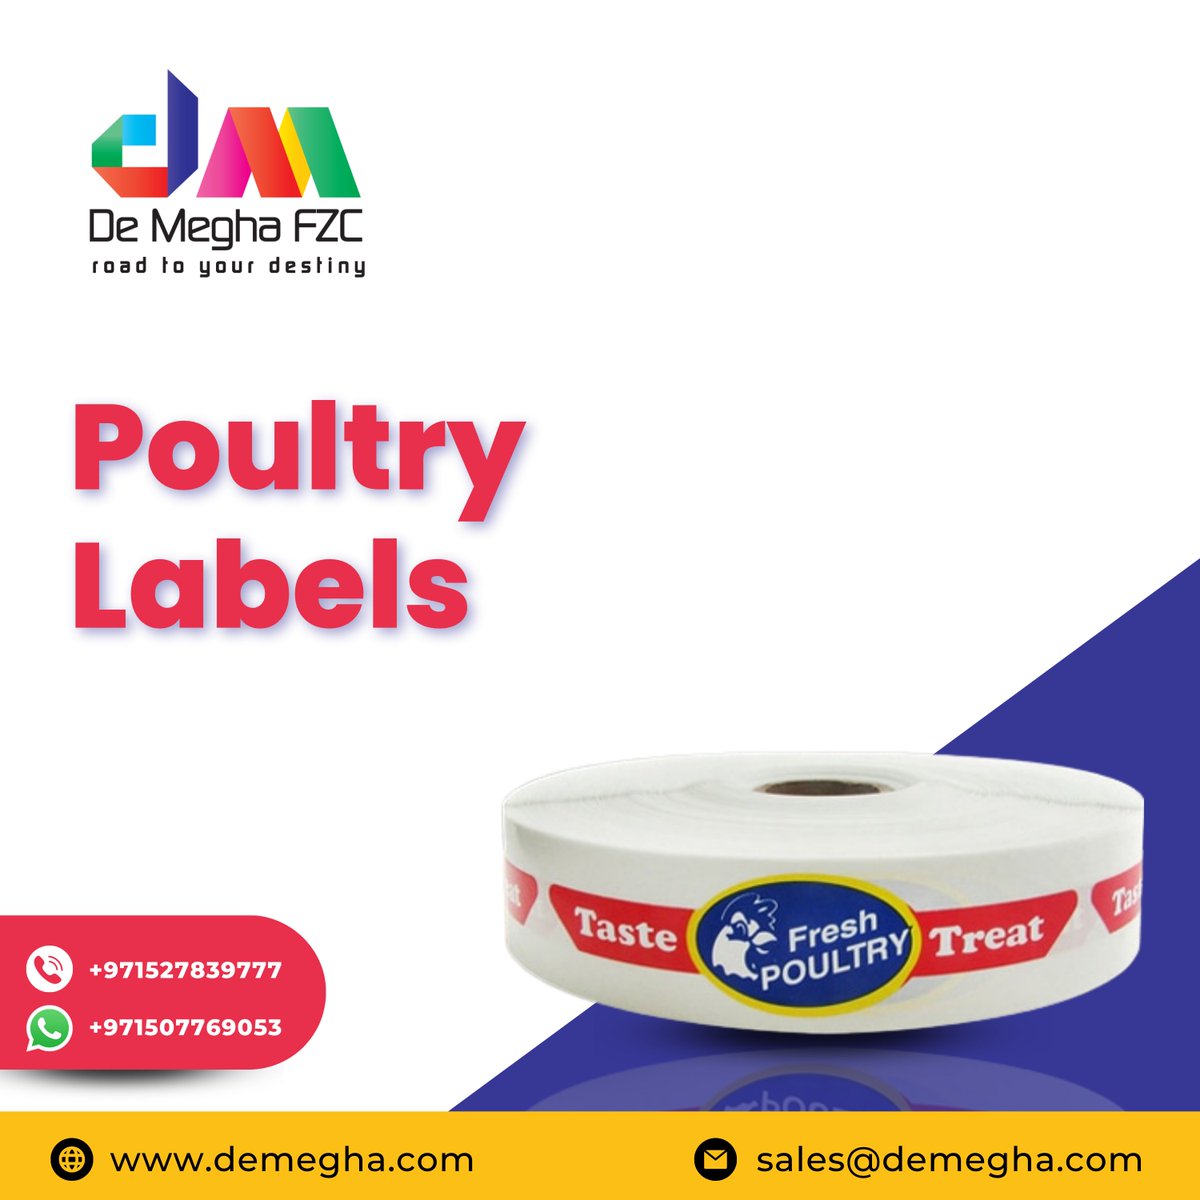 Our poultry labels ensure the highest quality and ethical standards in every product. From farm to table, we're committed to providing you with the best. 

Visit us at: demegha.com
.
.
#mobileprinter #miniprinter #portableprinter #thermalprinter #printerstruk